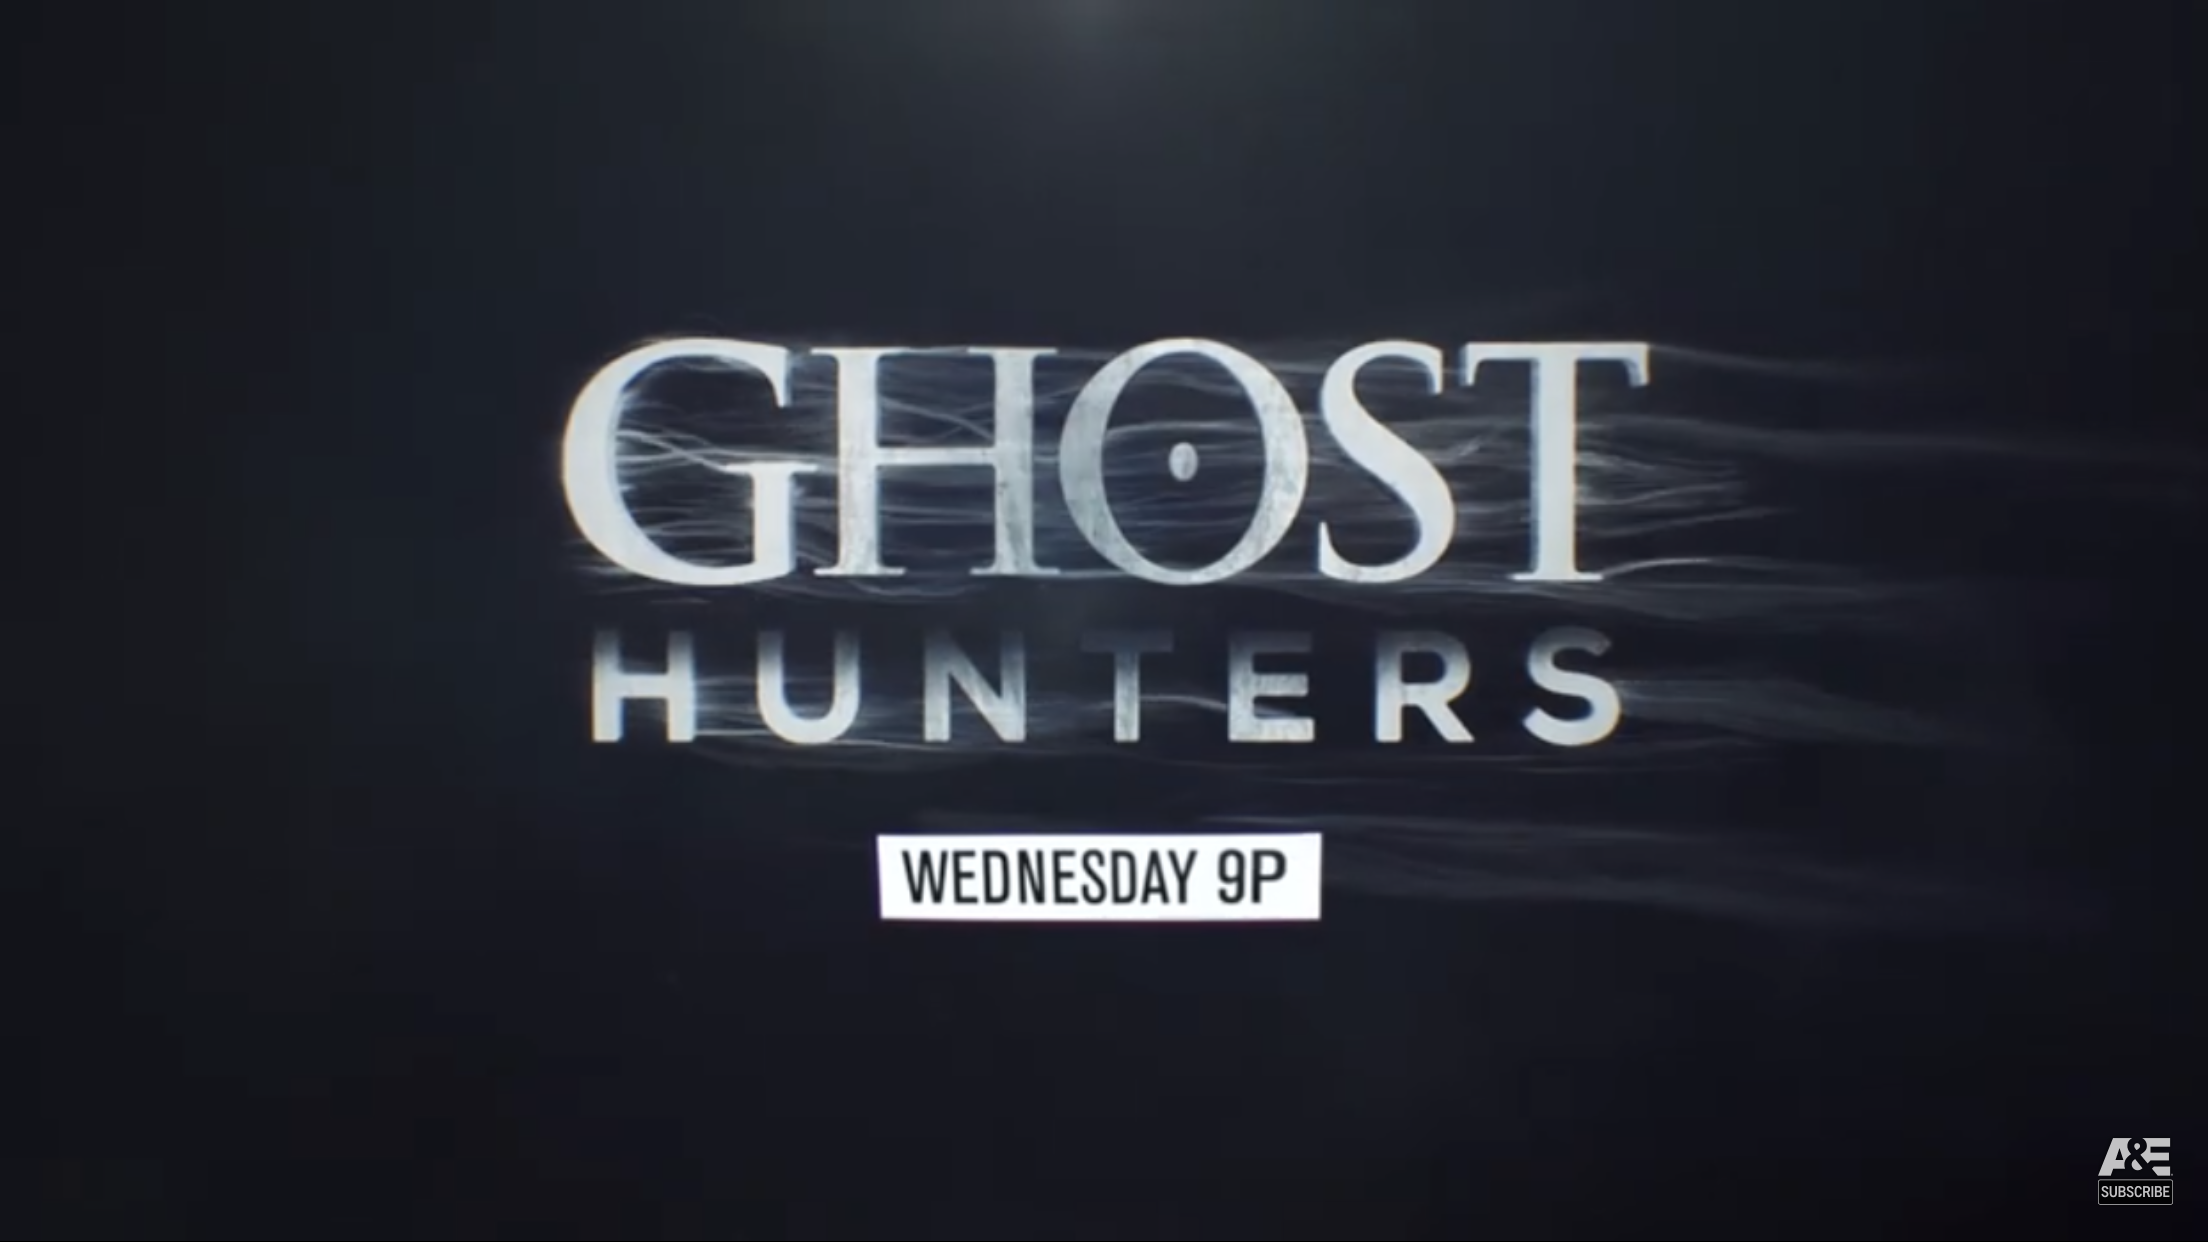 Ghost Hunters 2019 Season New Cast Led by Grant Wilson